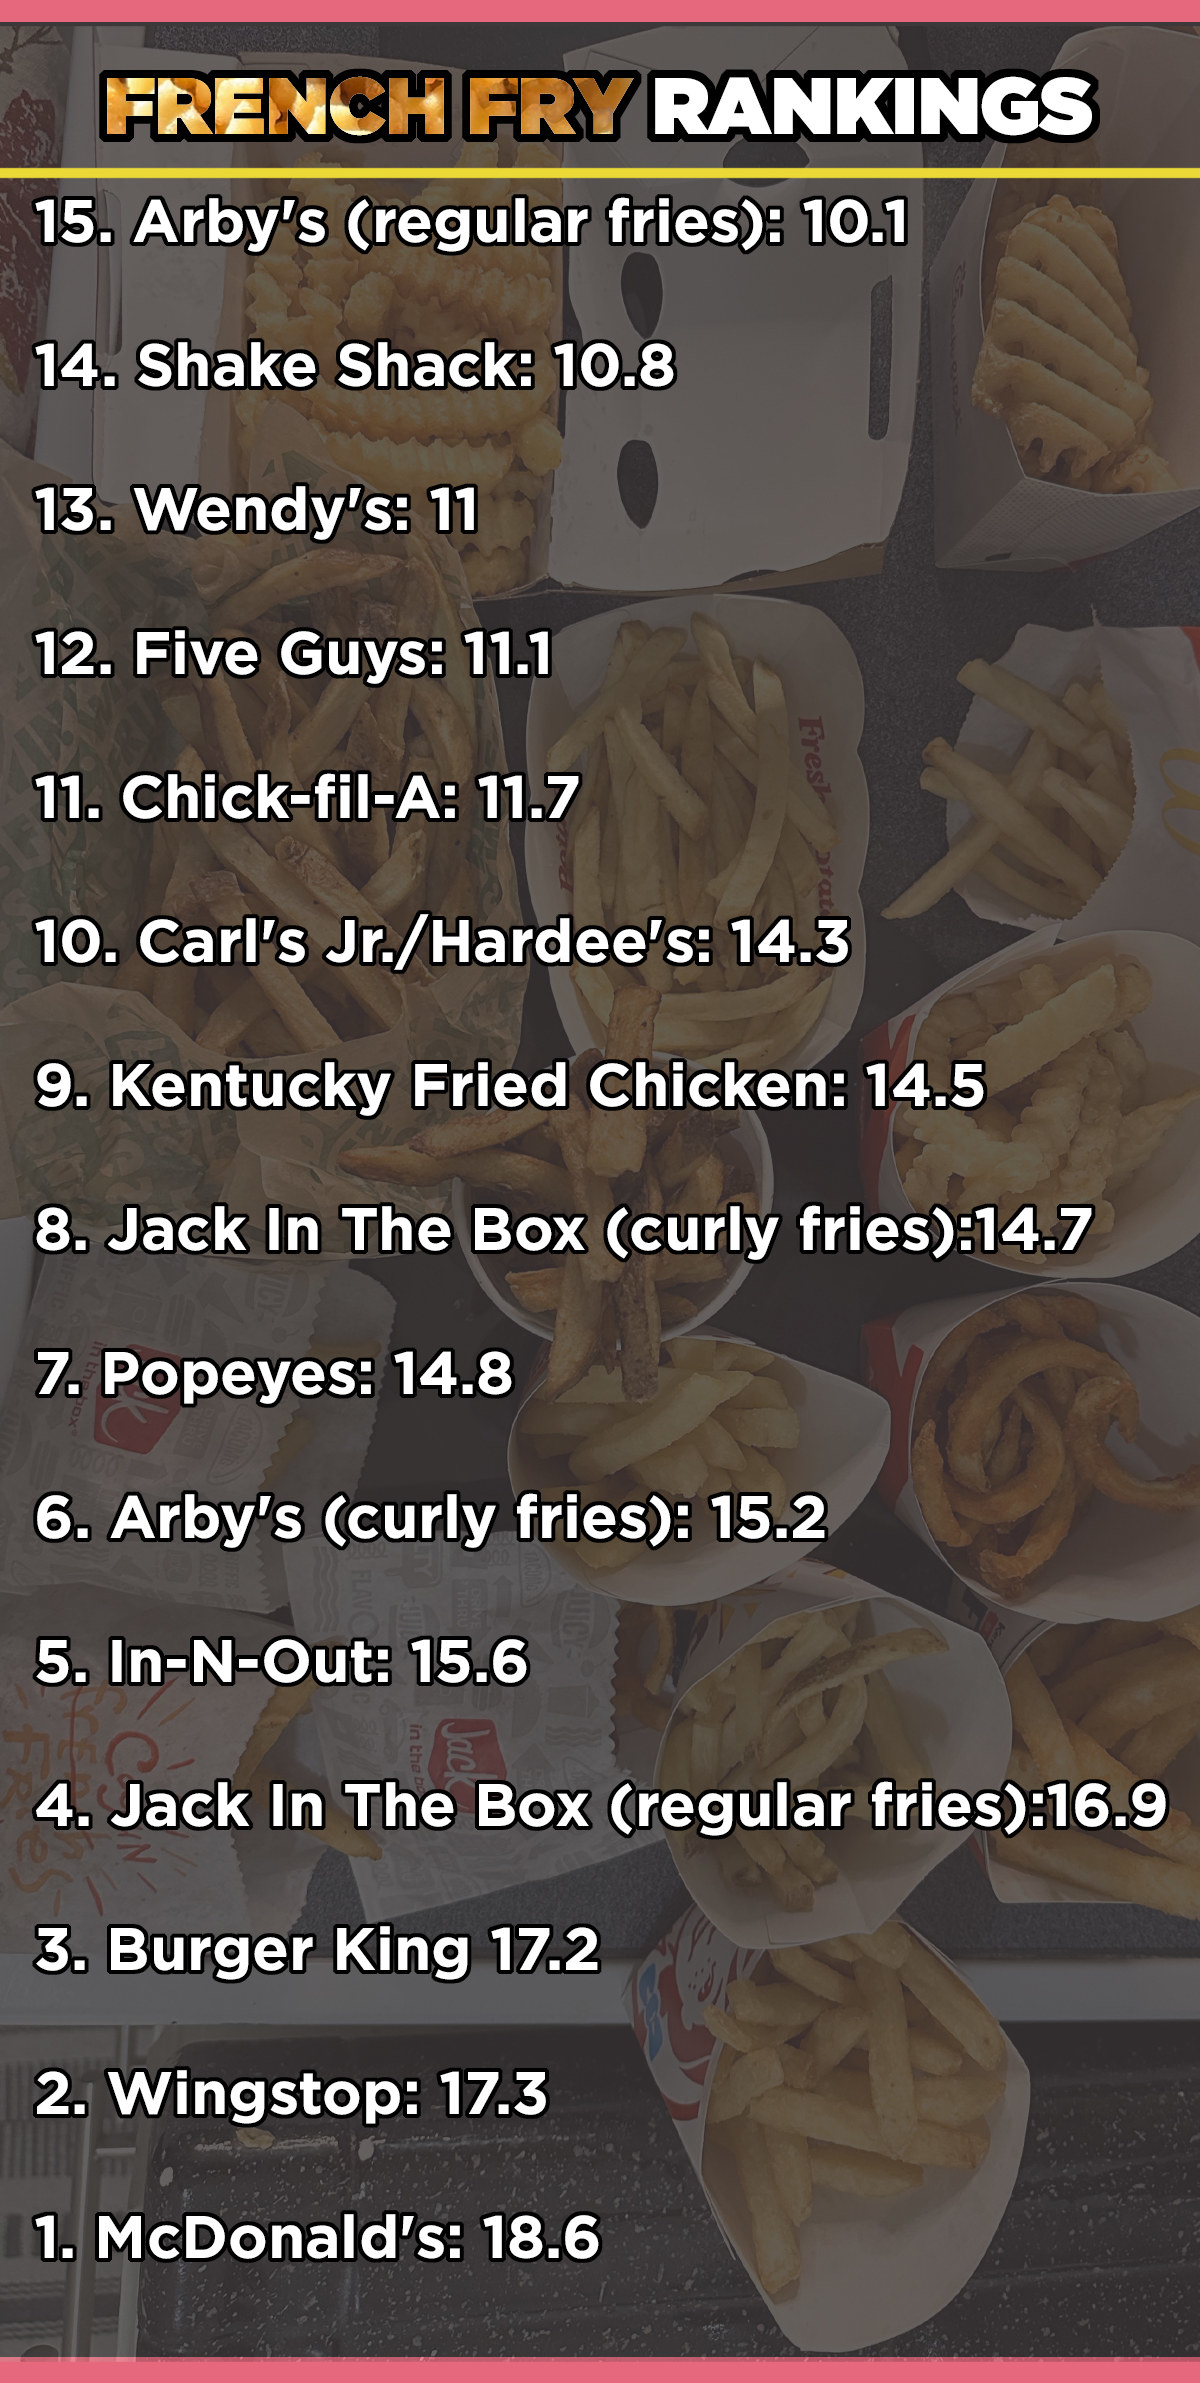 ranking of fries from lowest to highest